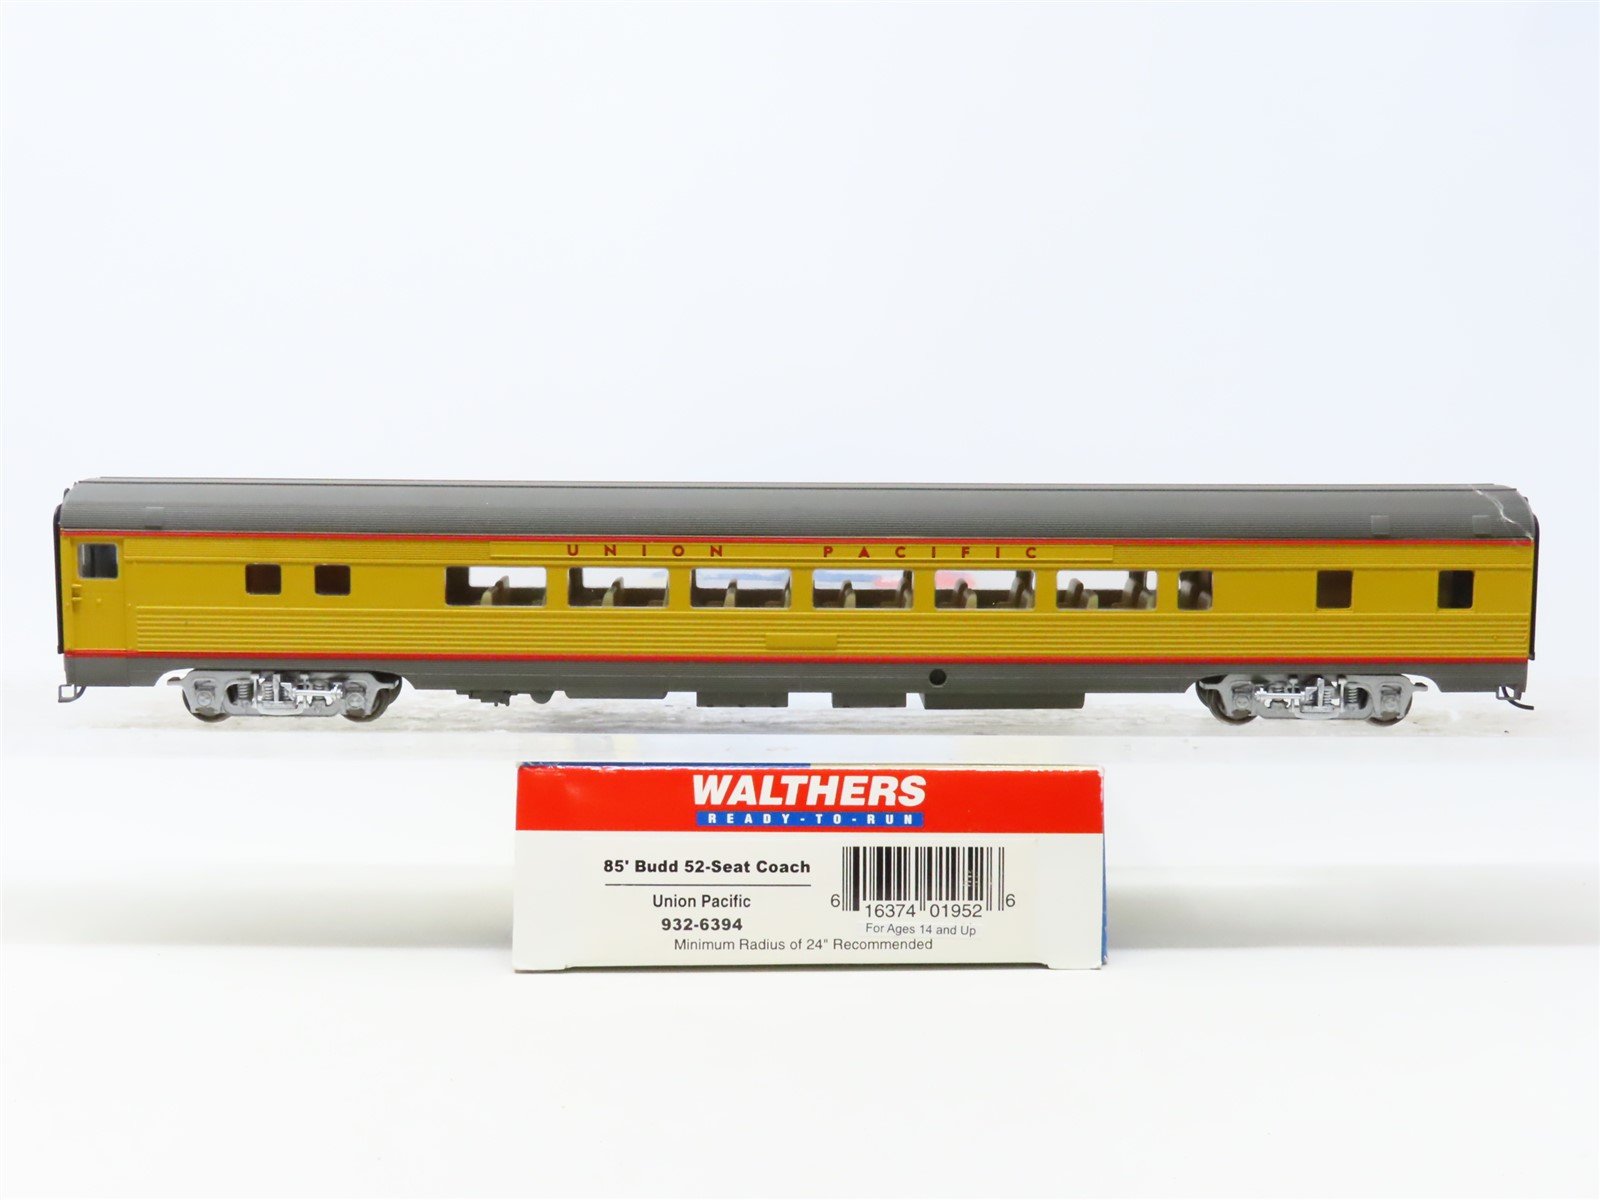 HO Scale Walthers 932-6394 UP Union Pacific 85' 52-Seat Coach Passenger Car